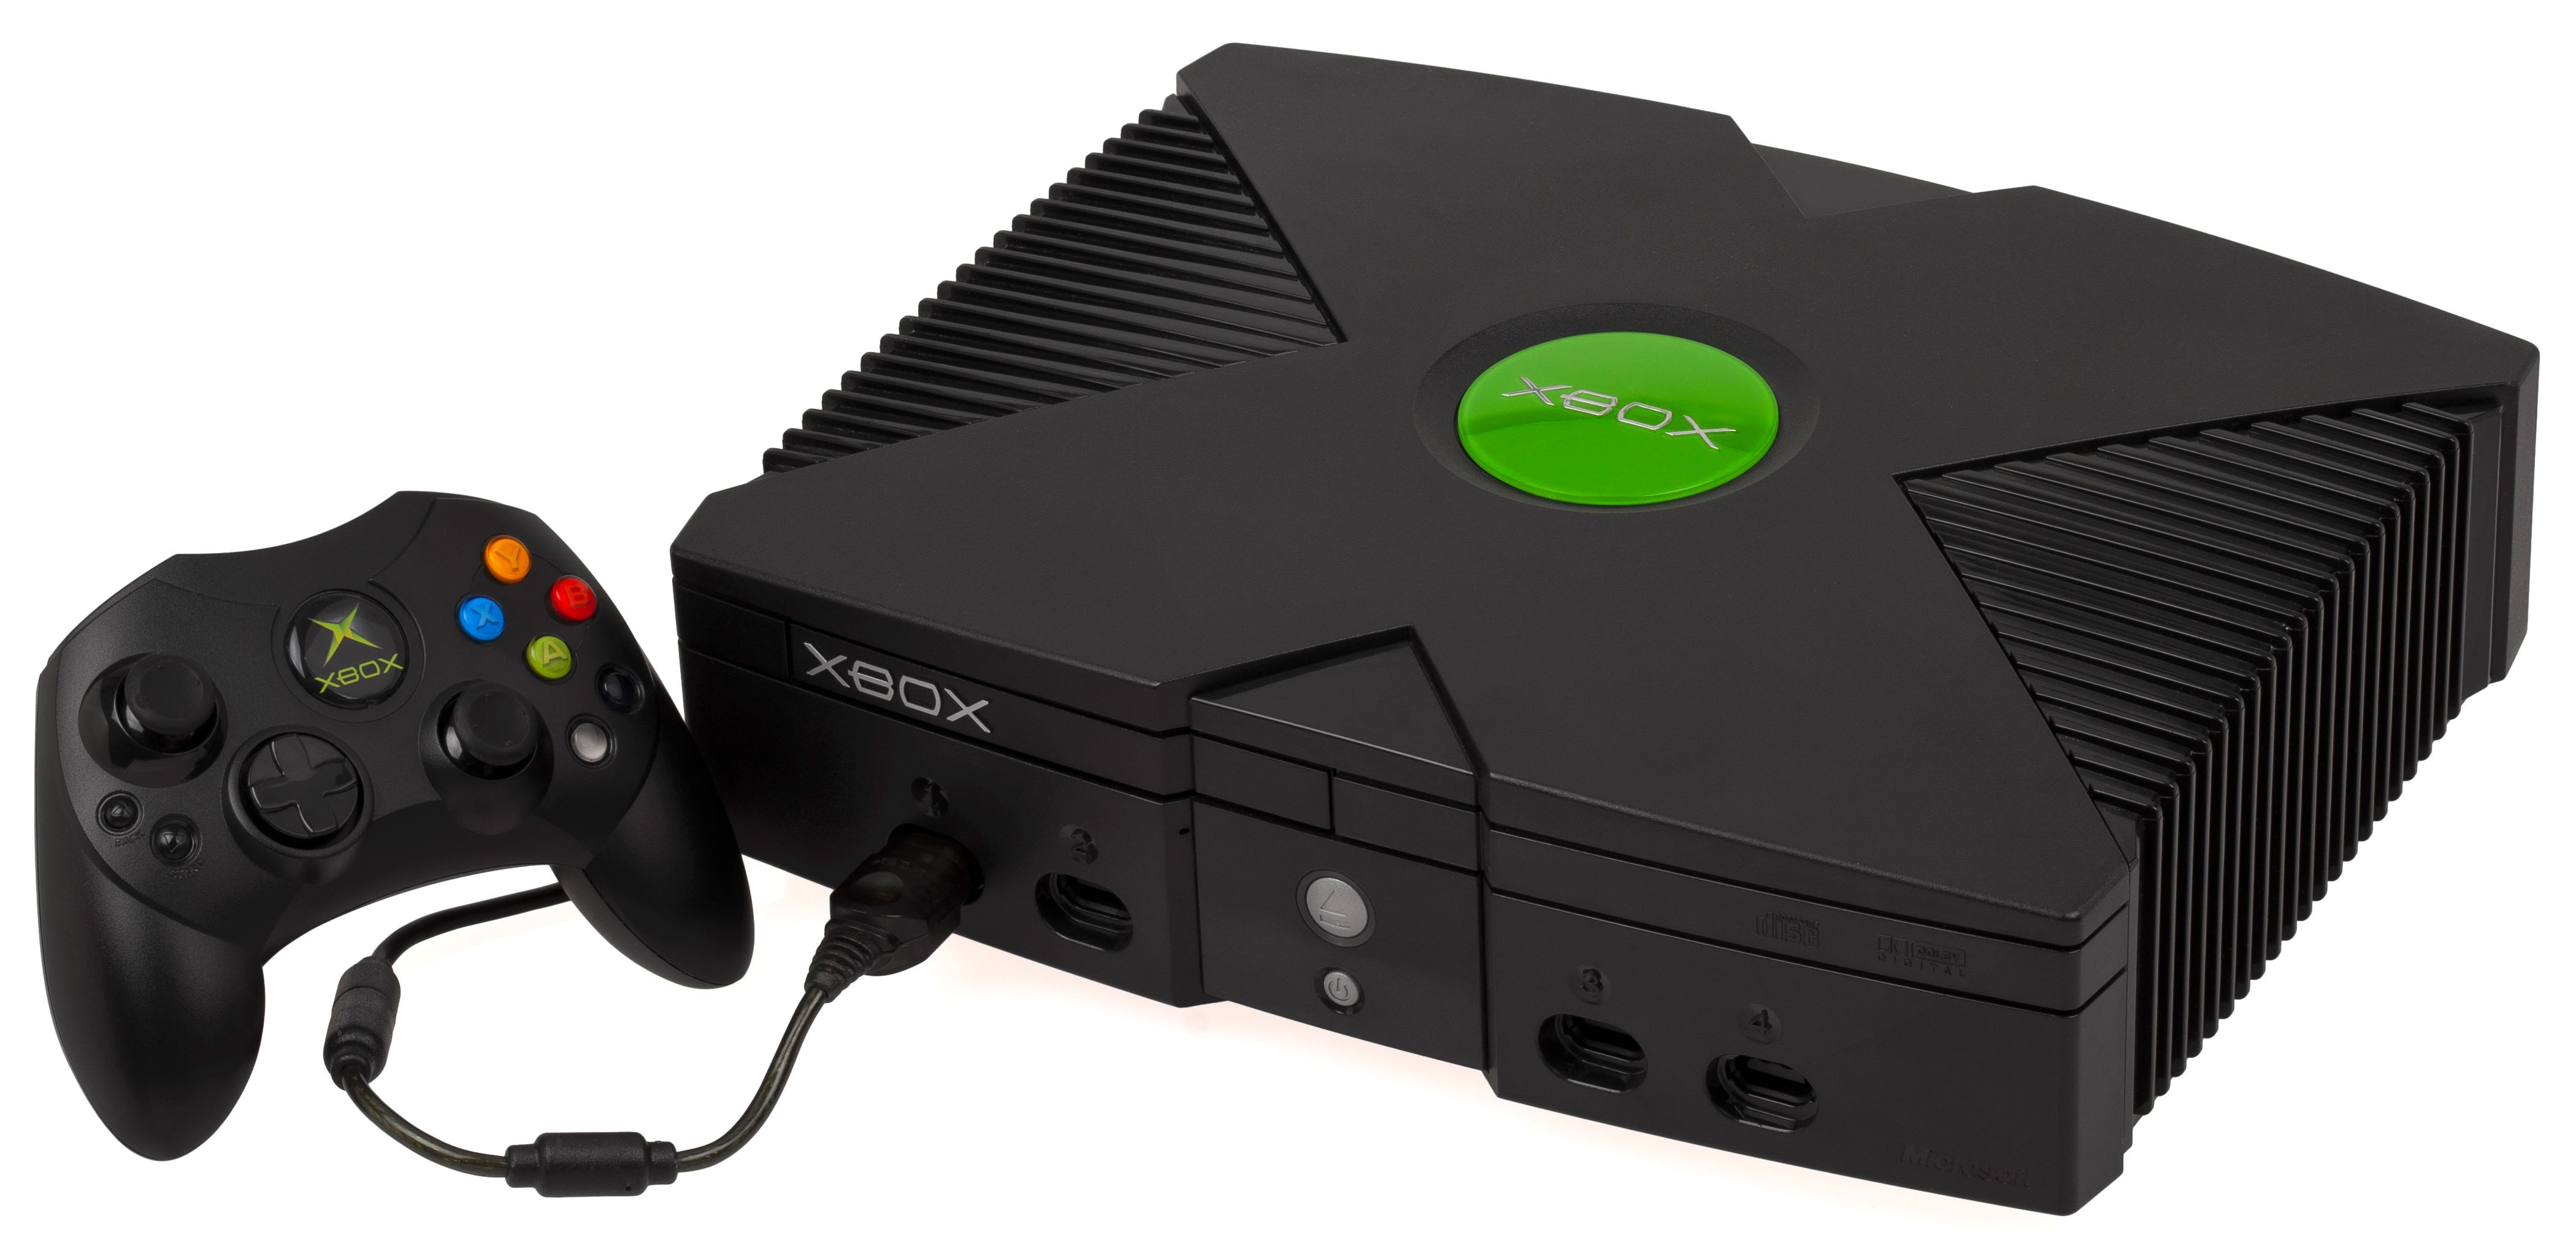 What Is The Original Xbox?